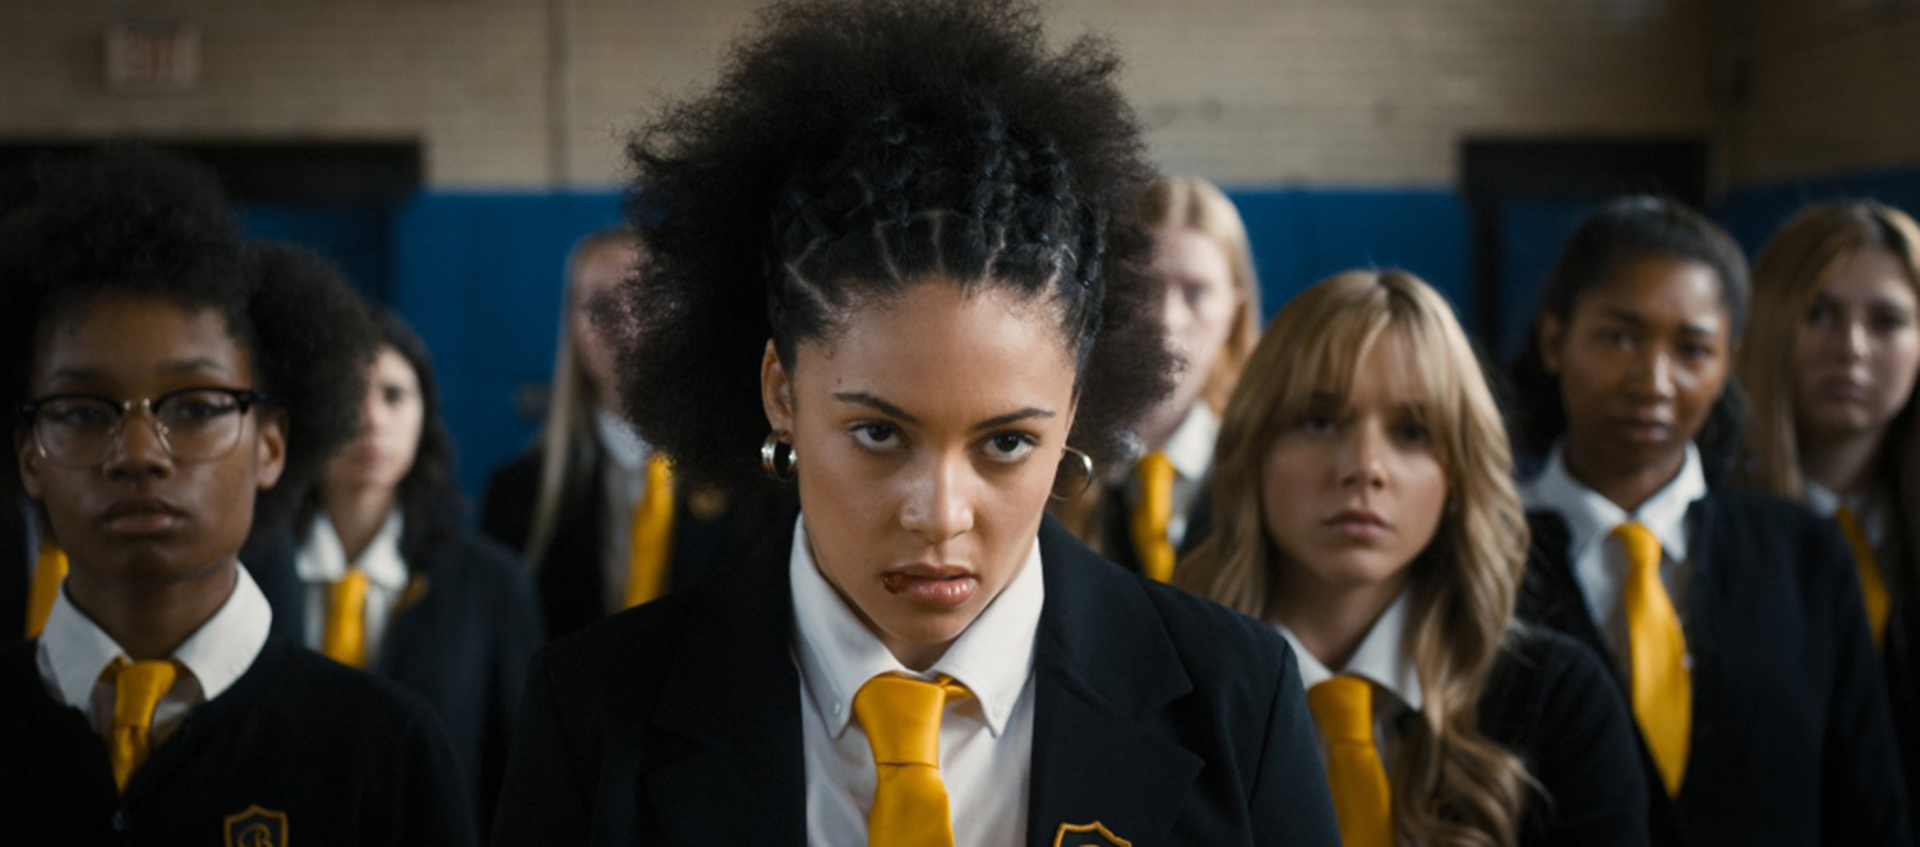 Close-up of a scowling young woman with dark, curly hair. She is surrounded by other young women in school uniforms with blue blazers and gold ties.